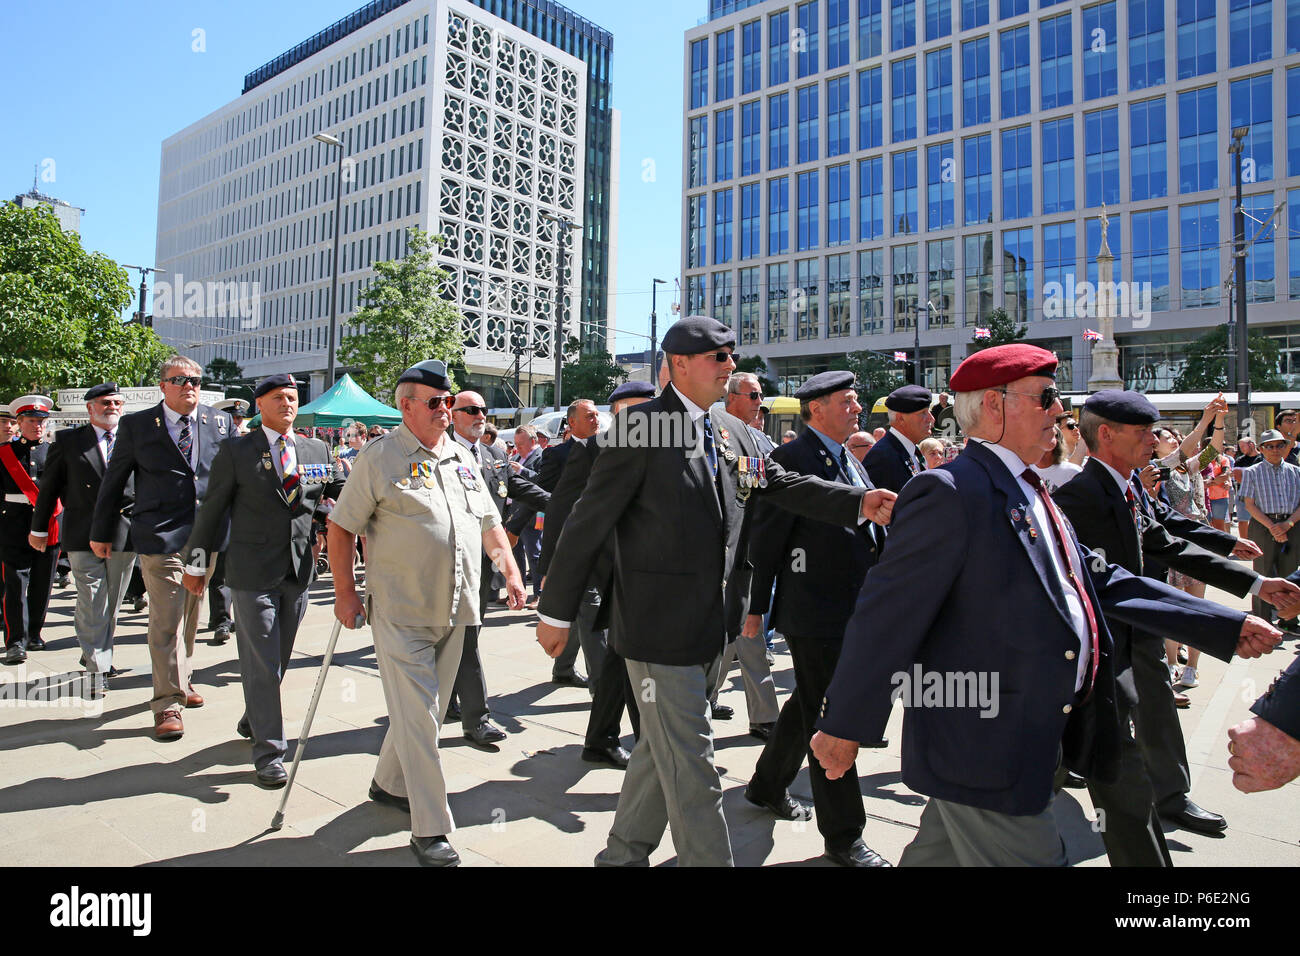 Manchester, UK, 30 June 2018. Veterans parade during celebrations of Armed Forces Day where the public are given the opportunity to meet members of the armed forces and talk to them about the work they do, St Peters Square, Manchester, 30th June, 2018 (C)Barbara Cook/Alamy Live News Stock Photo